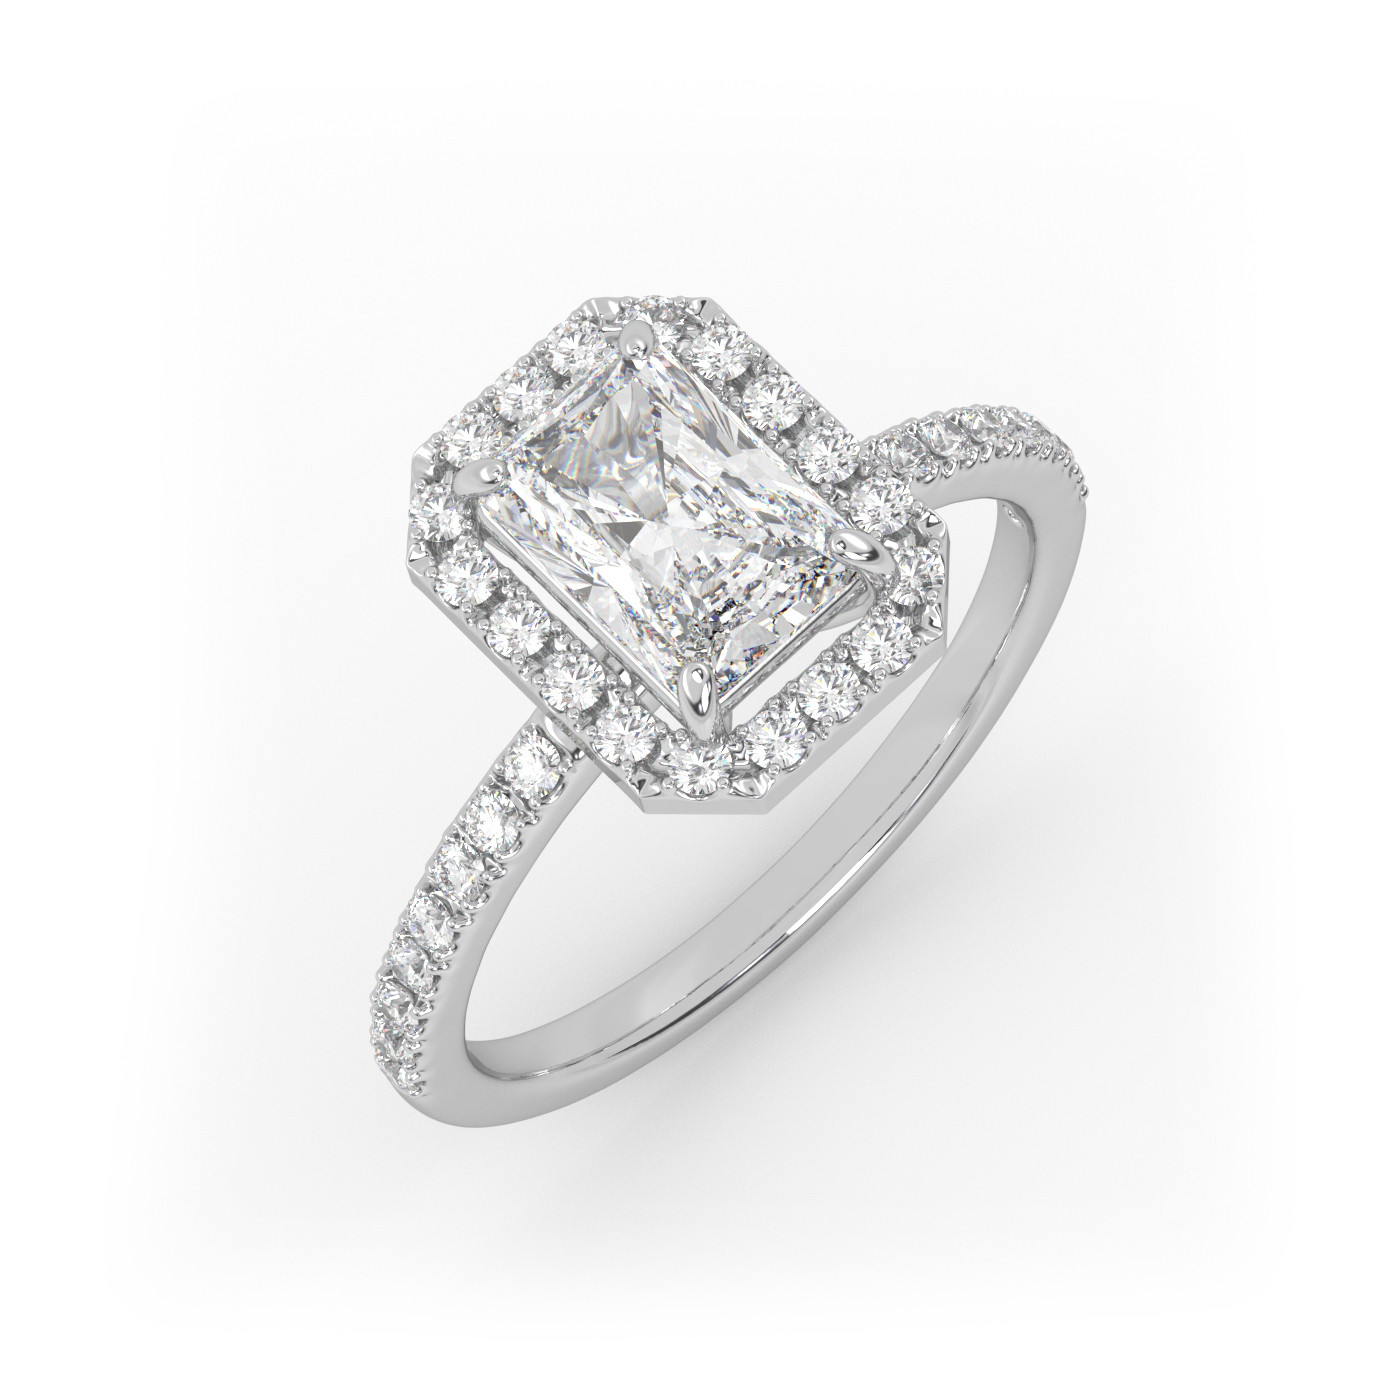 18K WHITE GOLD Radiant Cut Diamond engagement Ring with Halo and Pave style